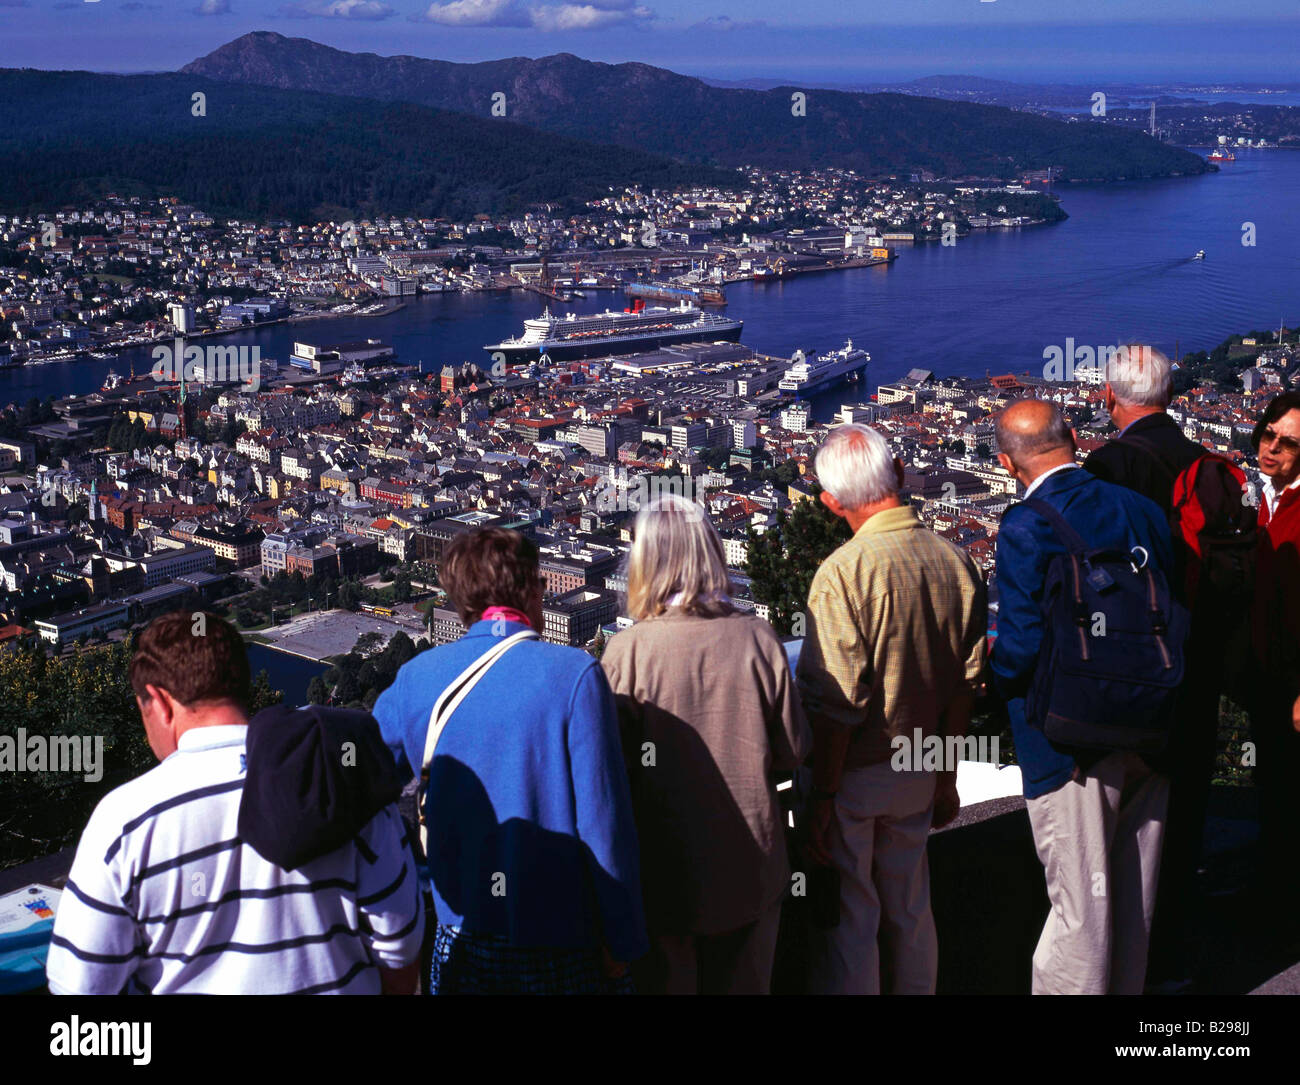 Bergen Norway Ref WP TCP 000665 0004 COMPULSORY CREDIT World Pictures Photoshot Stock Photo